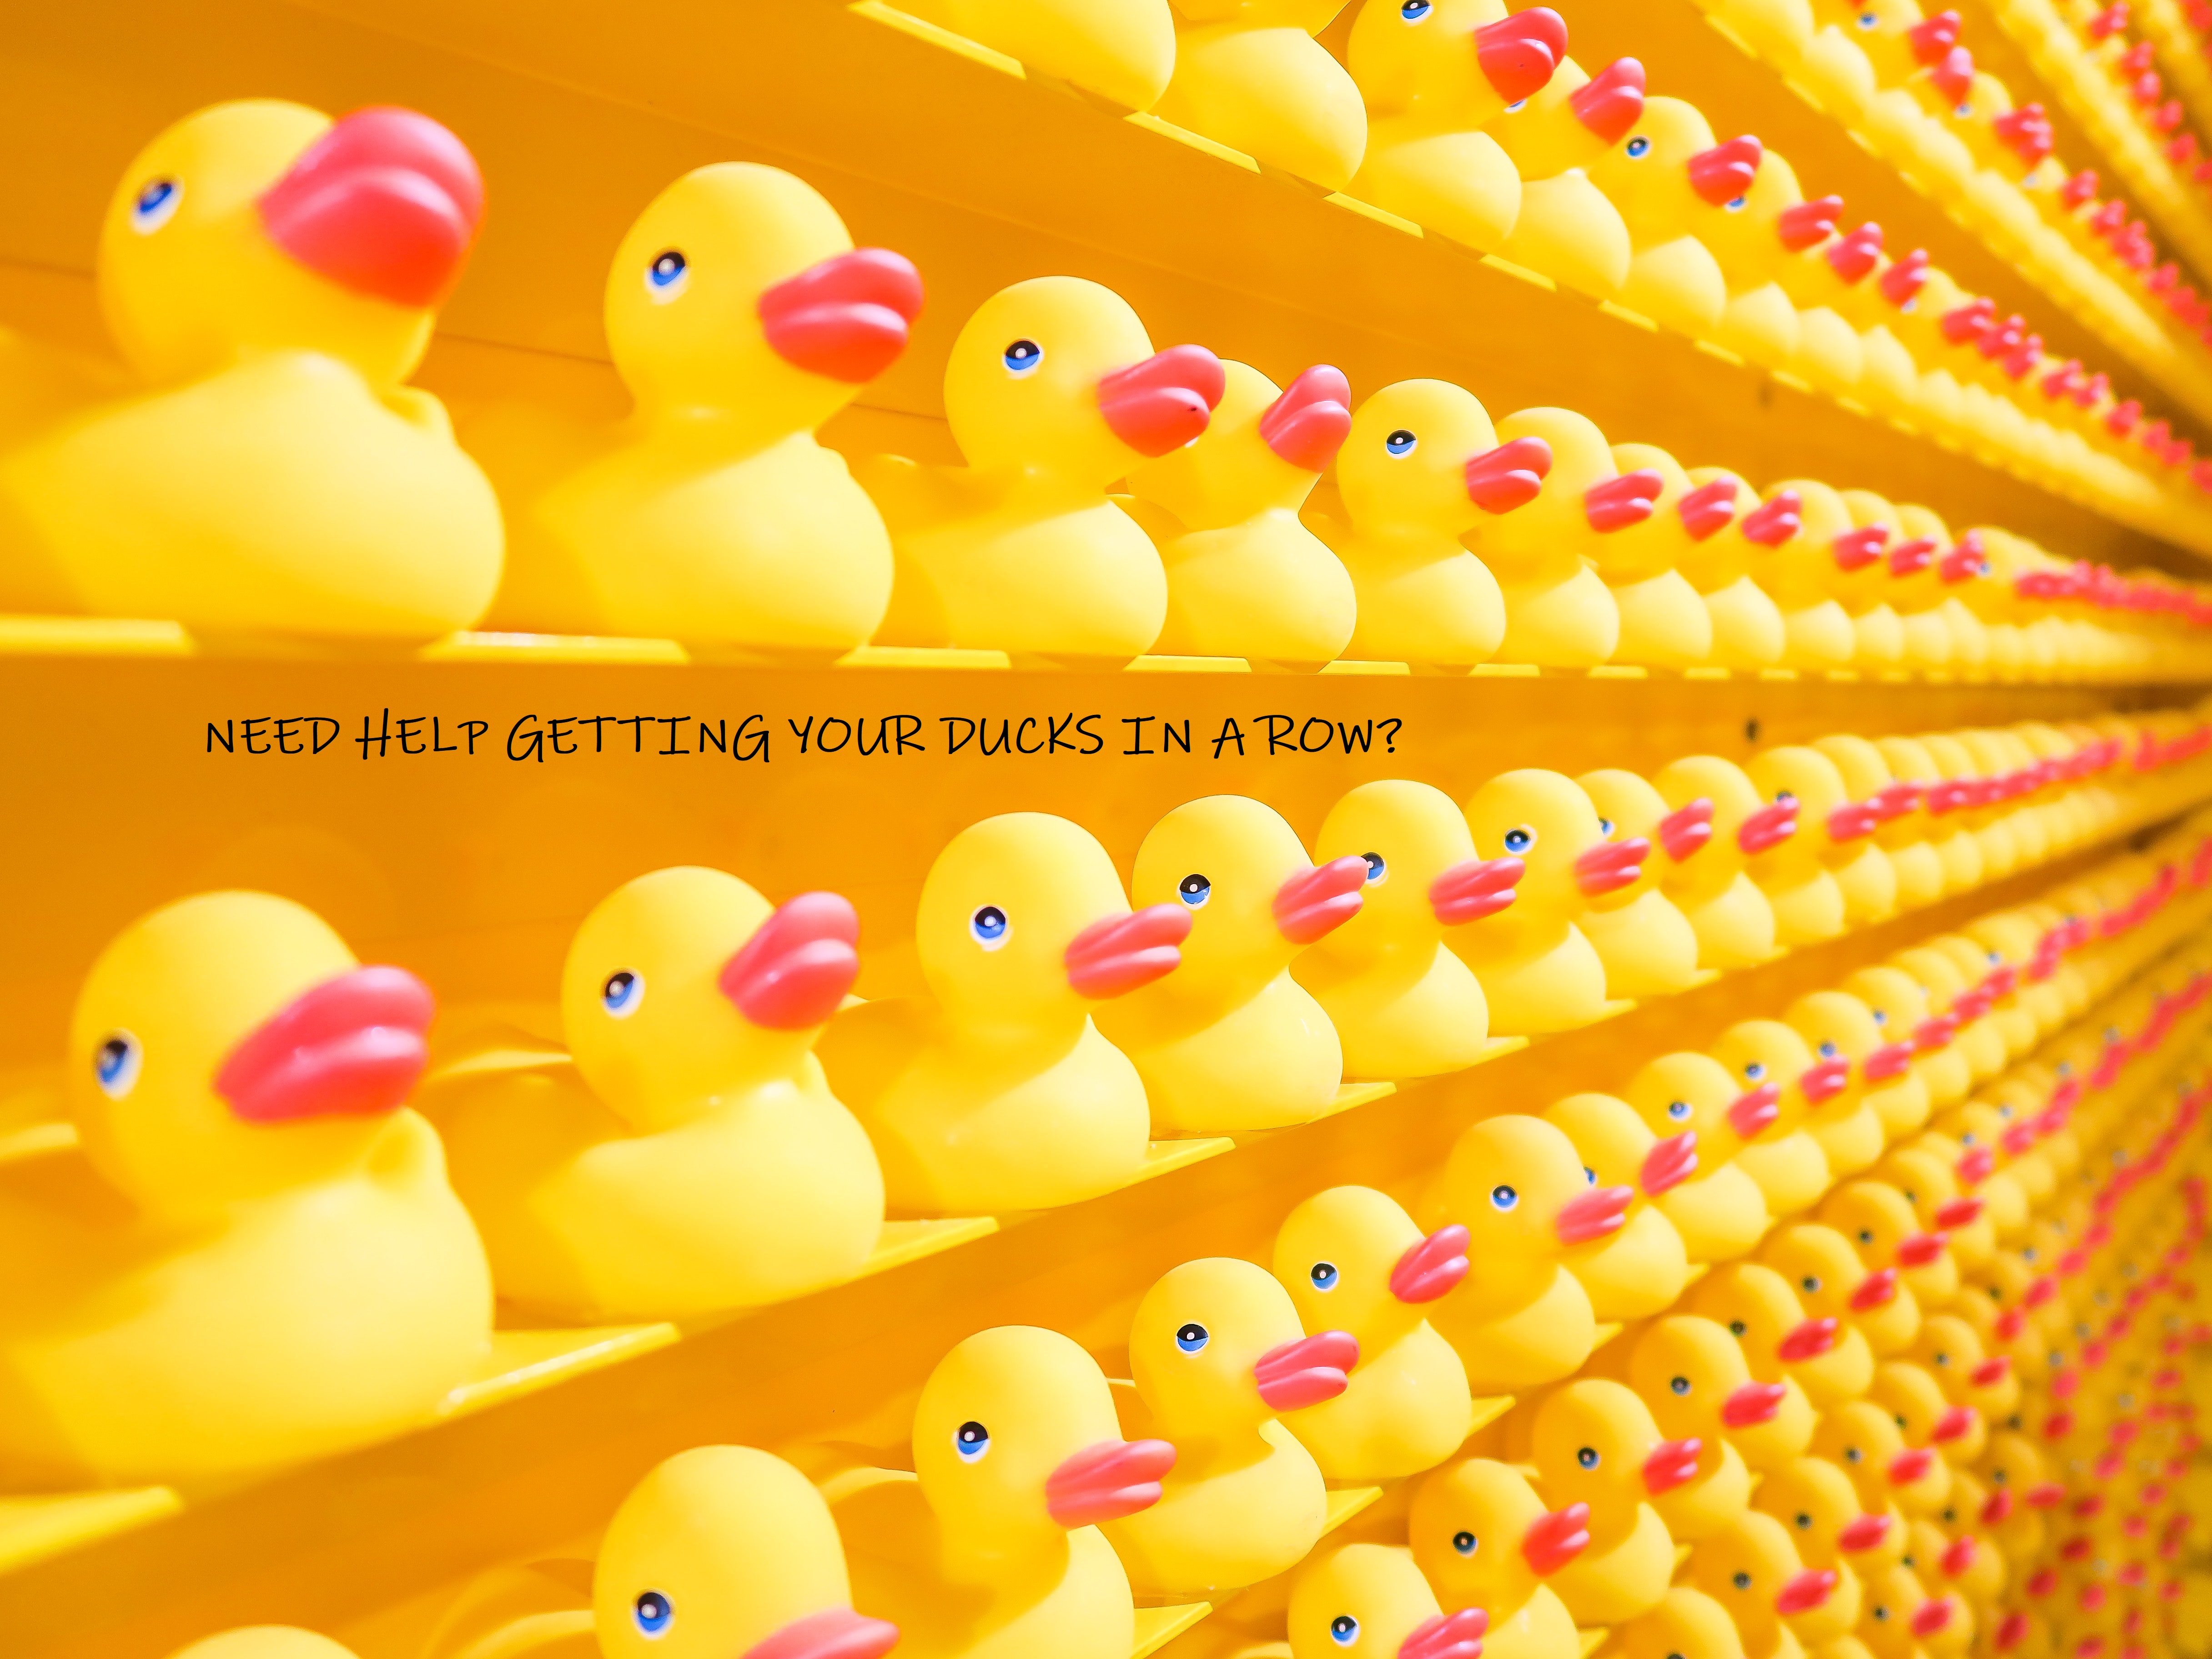 Need Help Getting Your Ducks in a Row?